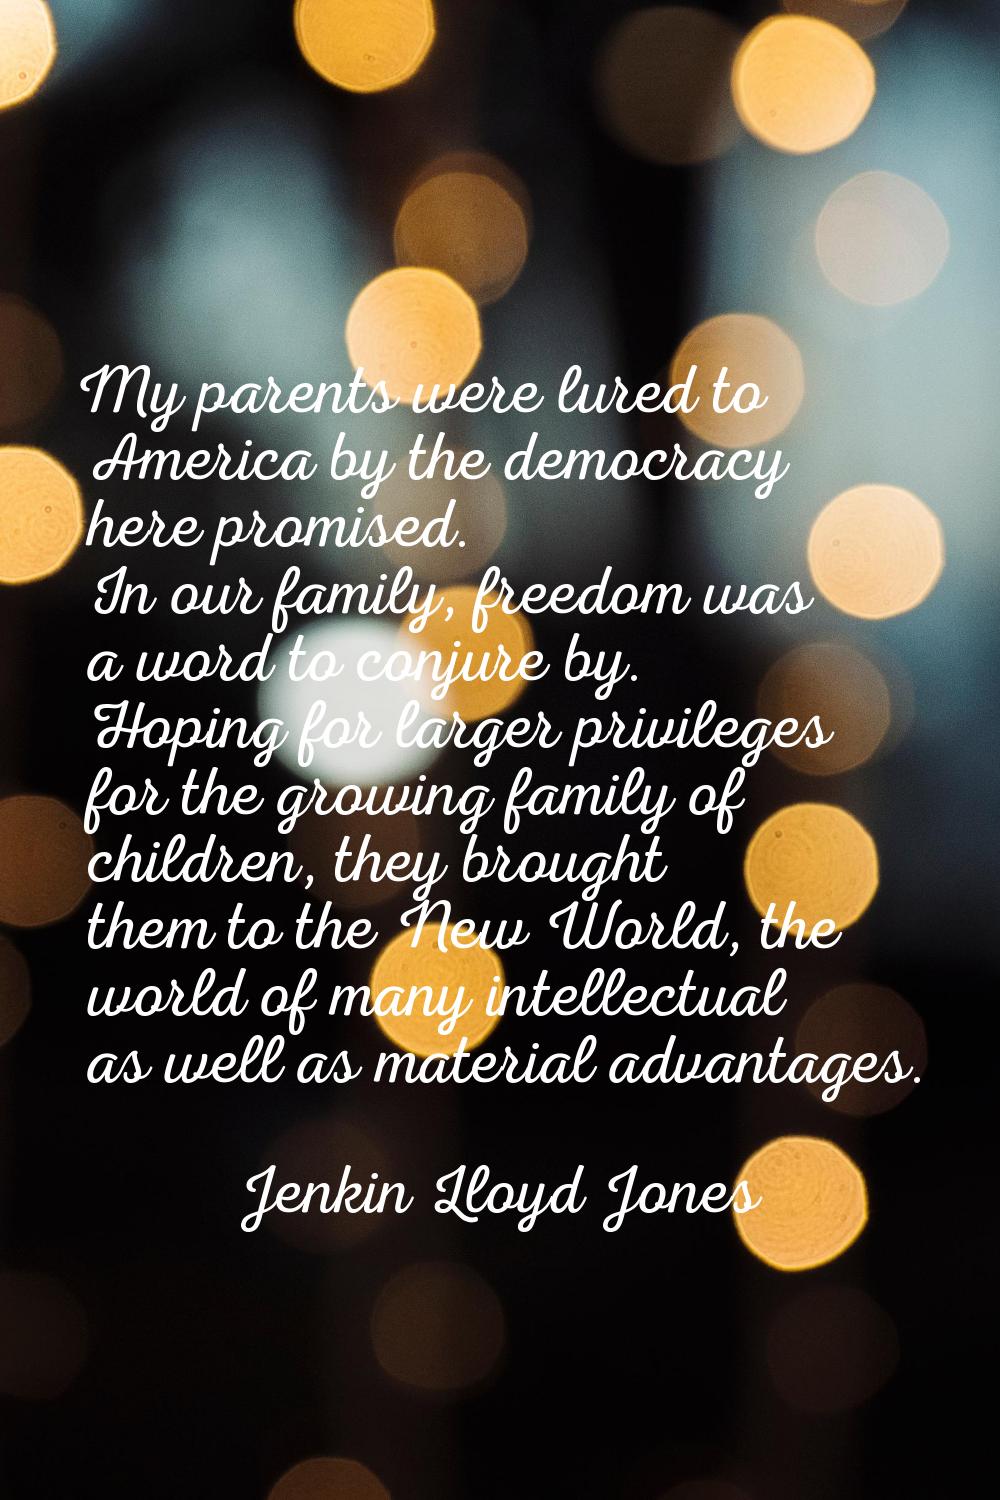 My parents were lured to America by the democracy here promised. In our family, freedom was a word 